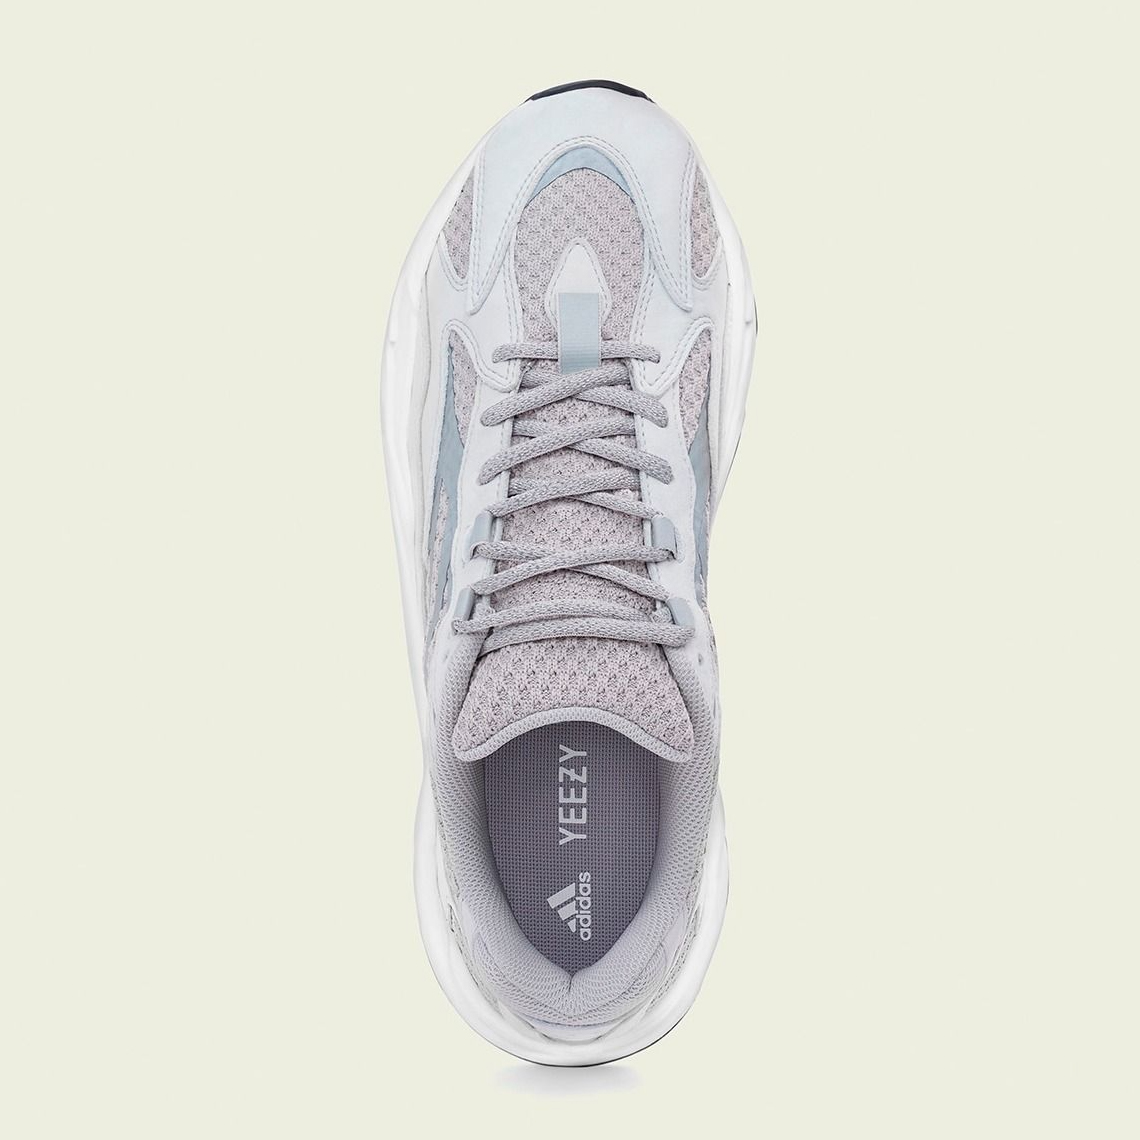 adidas yeezy boost 700 v2 static 2022 release date 2